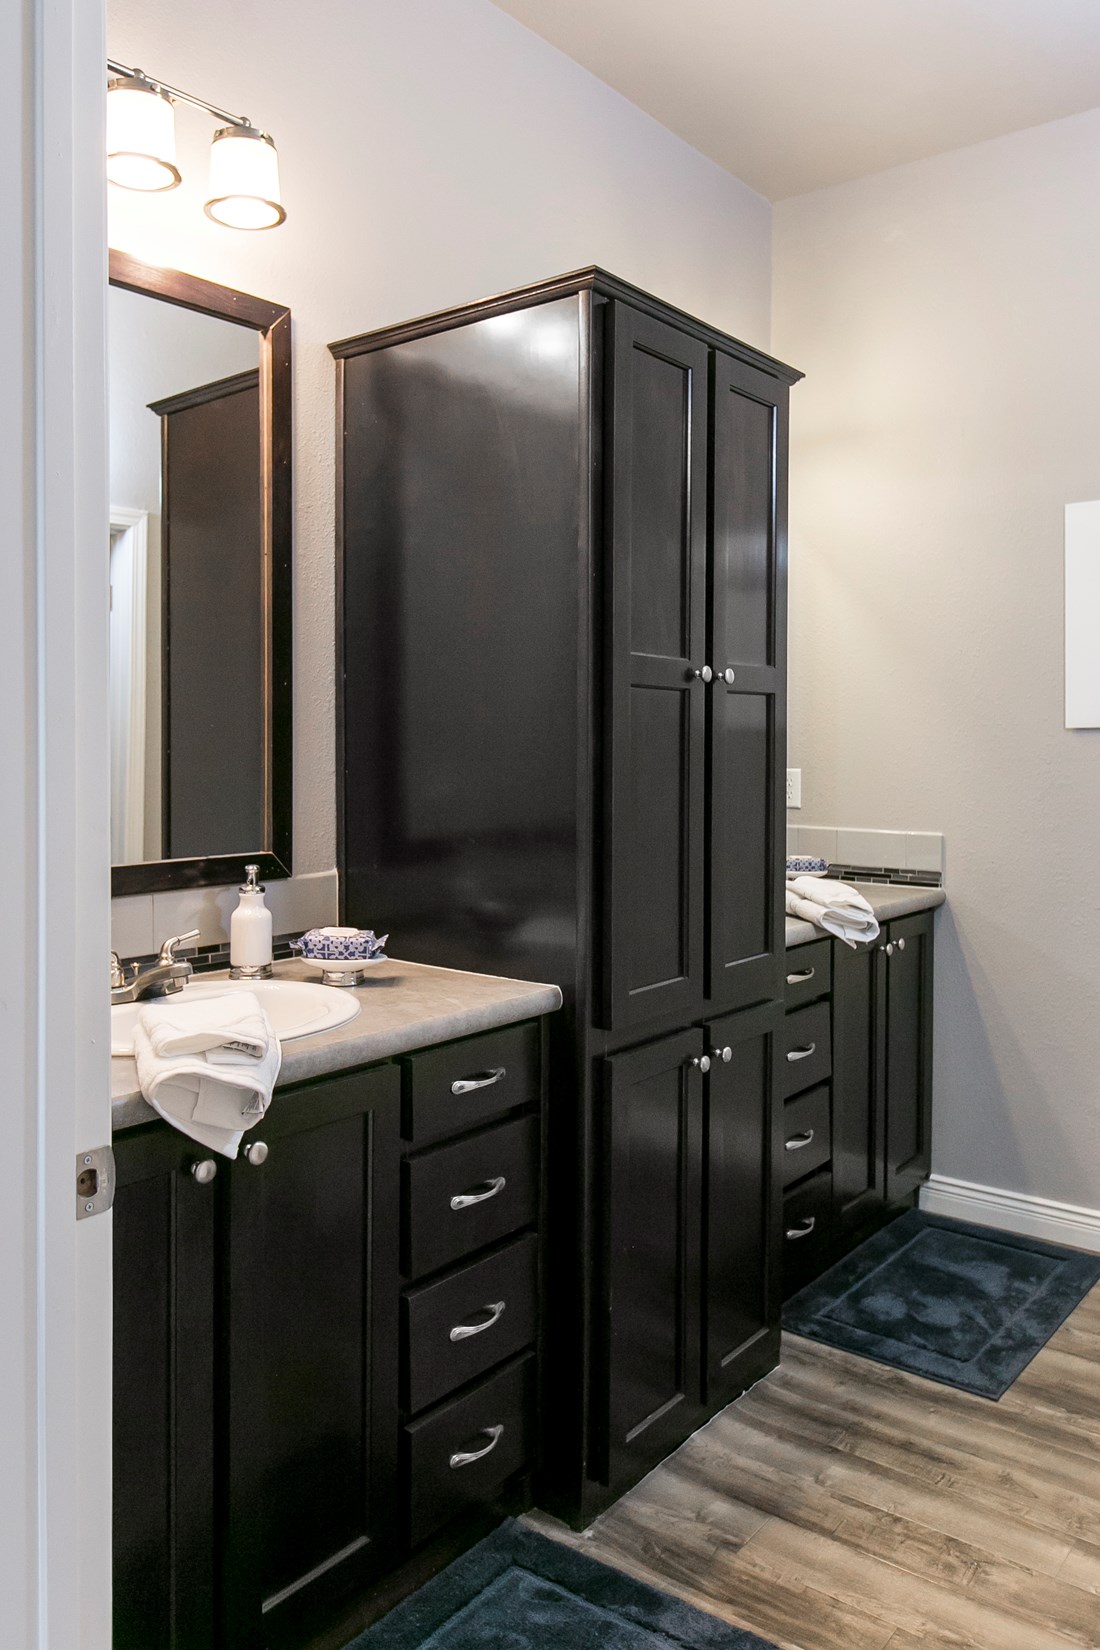 The GSP643K PLATINUM SERIES Guest Bathroom. This Manufactured Mobile Home features 3 bedrooms and 2 baths.